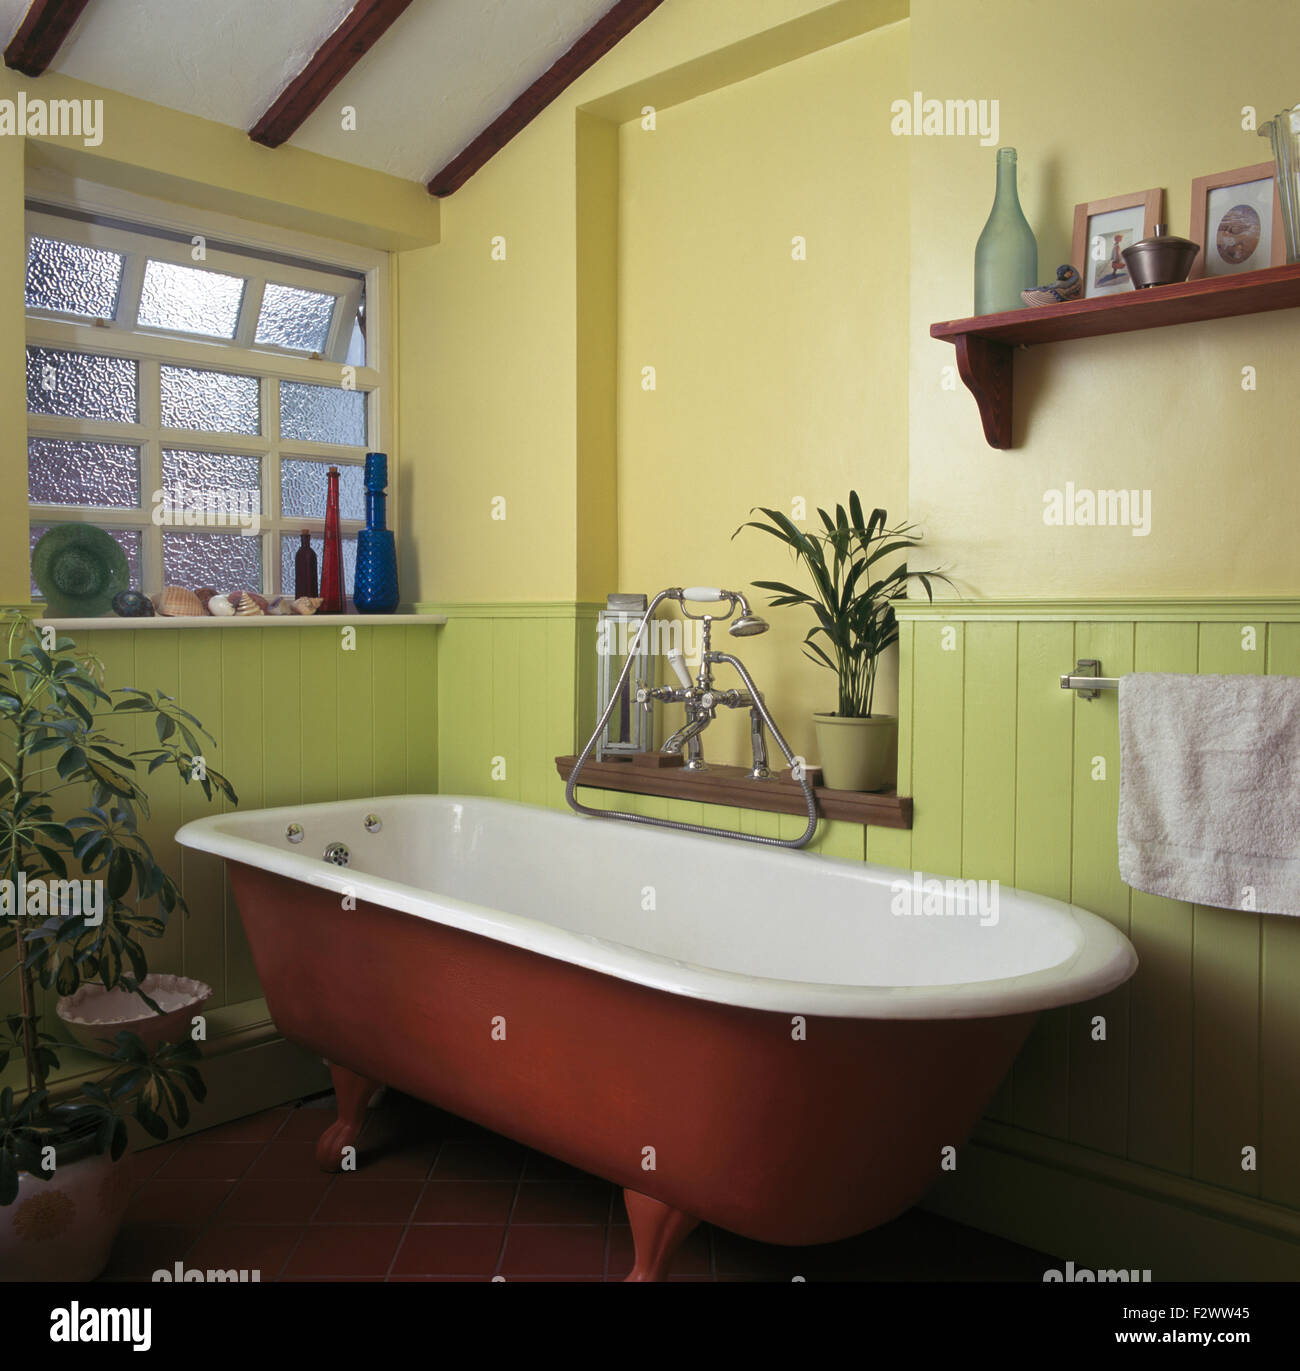 Roll top bath in nineties bathroom with frosted glass window and lime green tongue+groove dado panelling Stock Photo